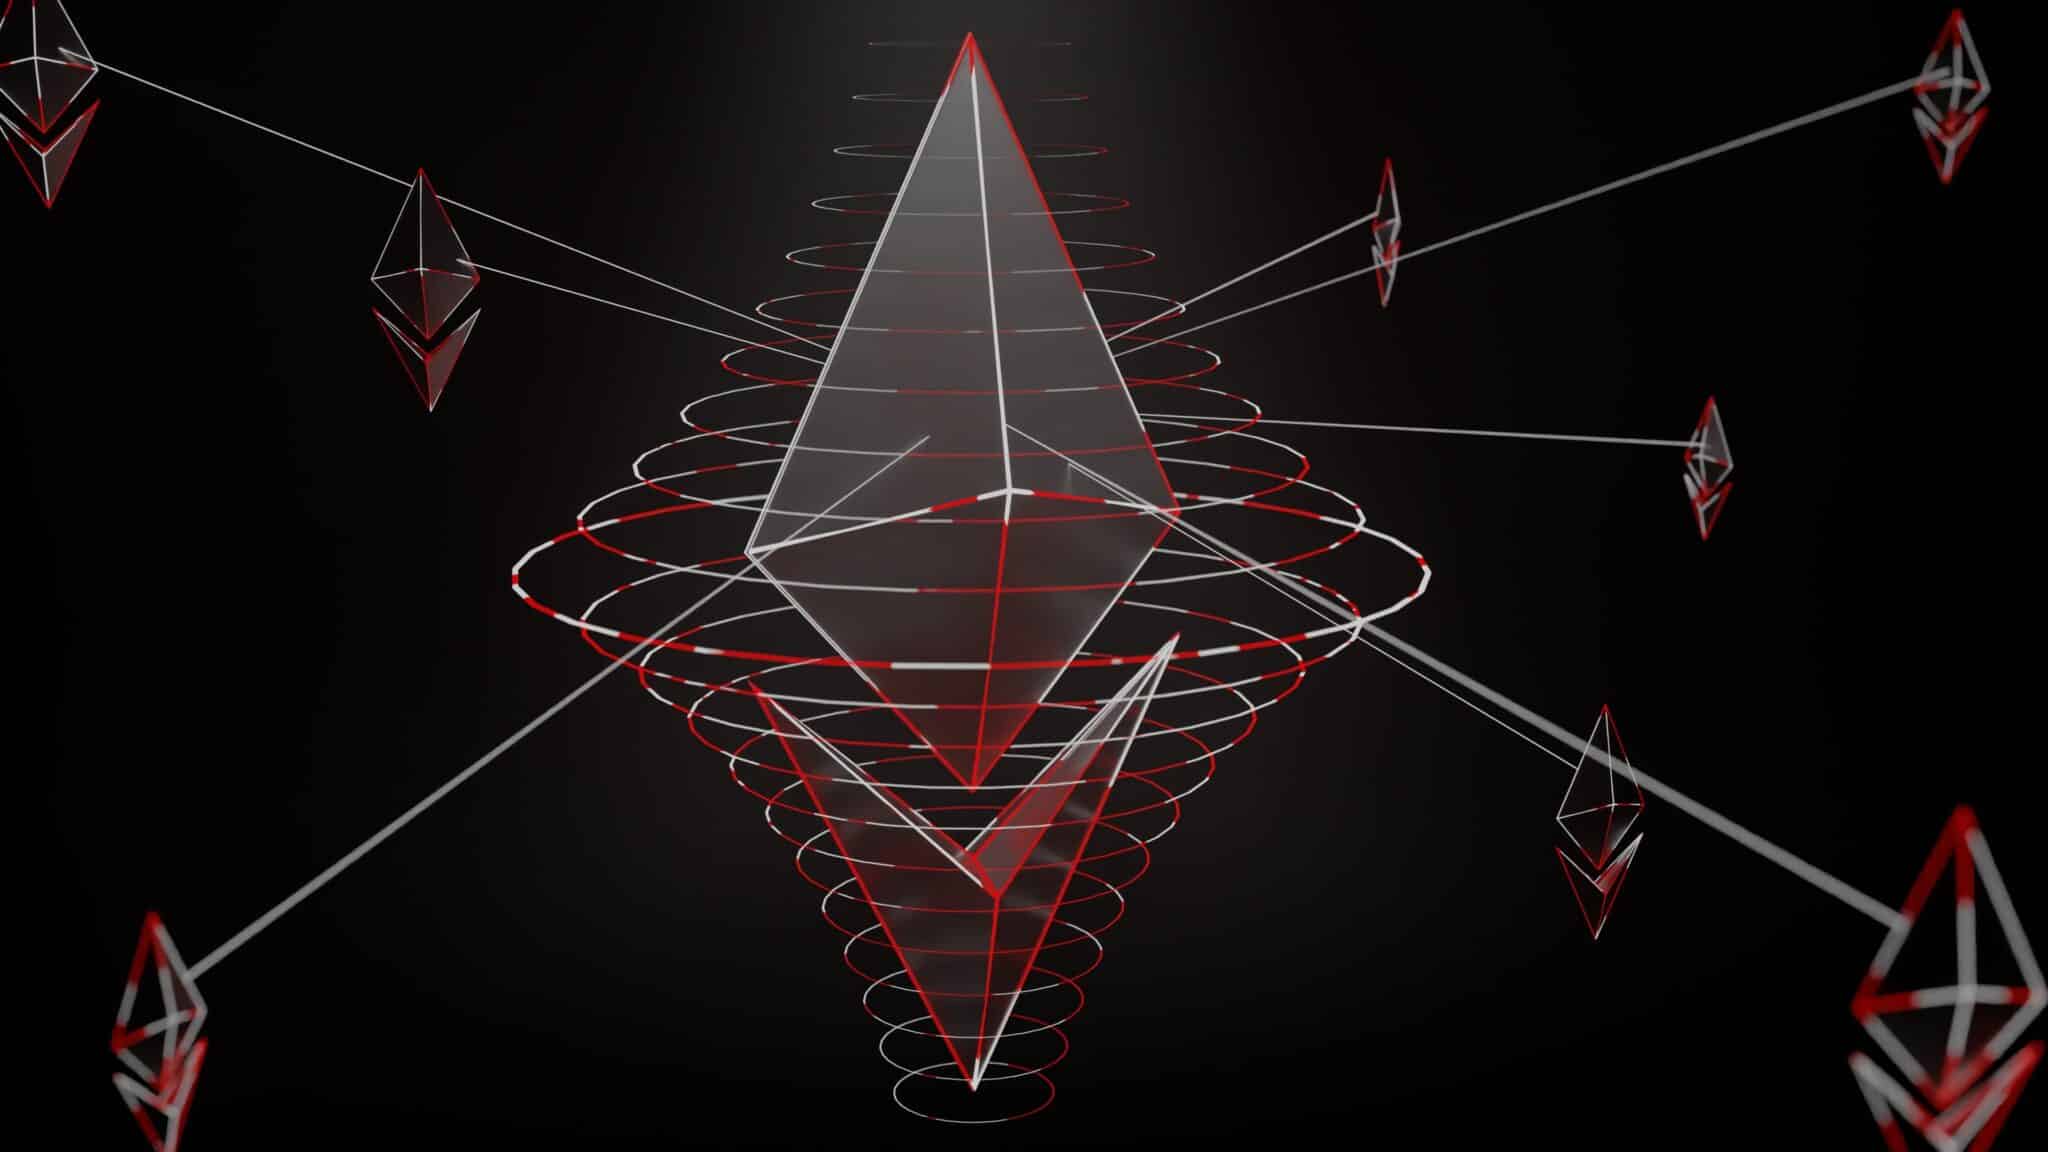 3D illustration of a network of ethereum in dark.red, white, and black colored ethereum illustration.「 LOGO / BRAND / 3D design 」 WhatsApp: +917559305753 Email: shubhamdhage000@gmail.com